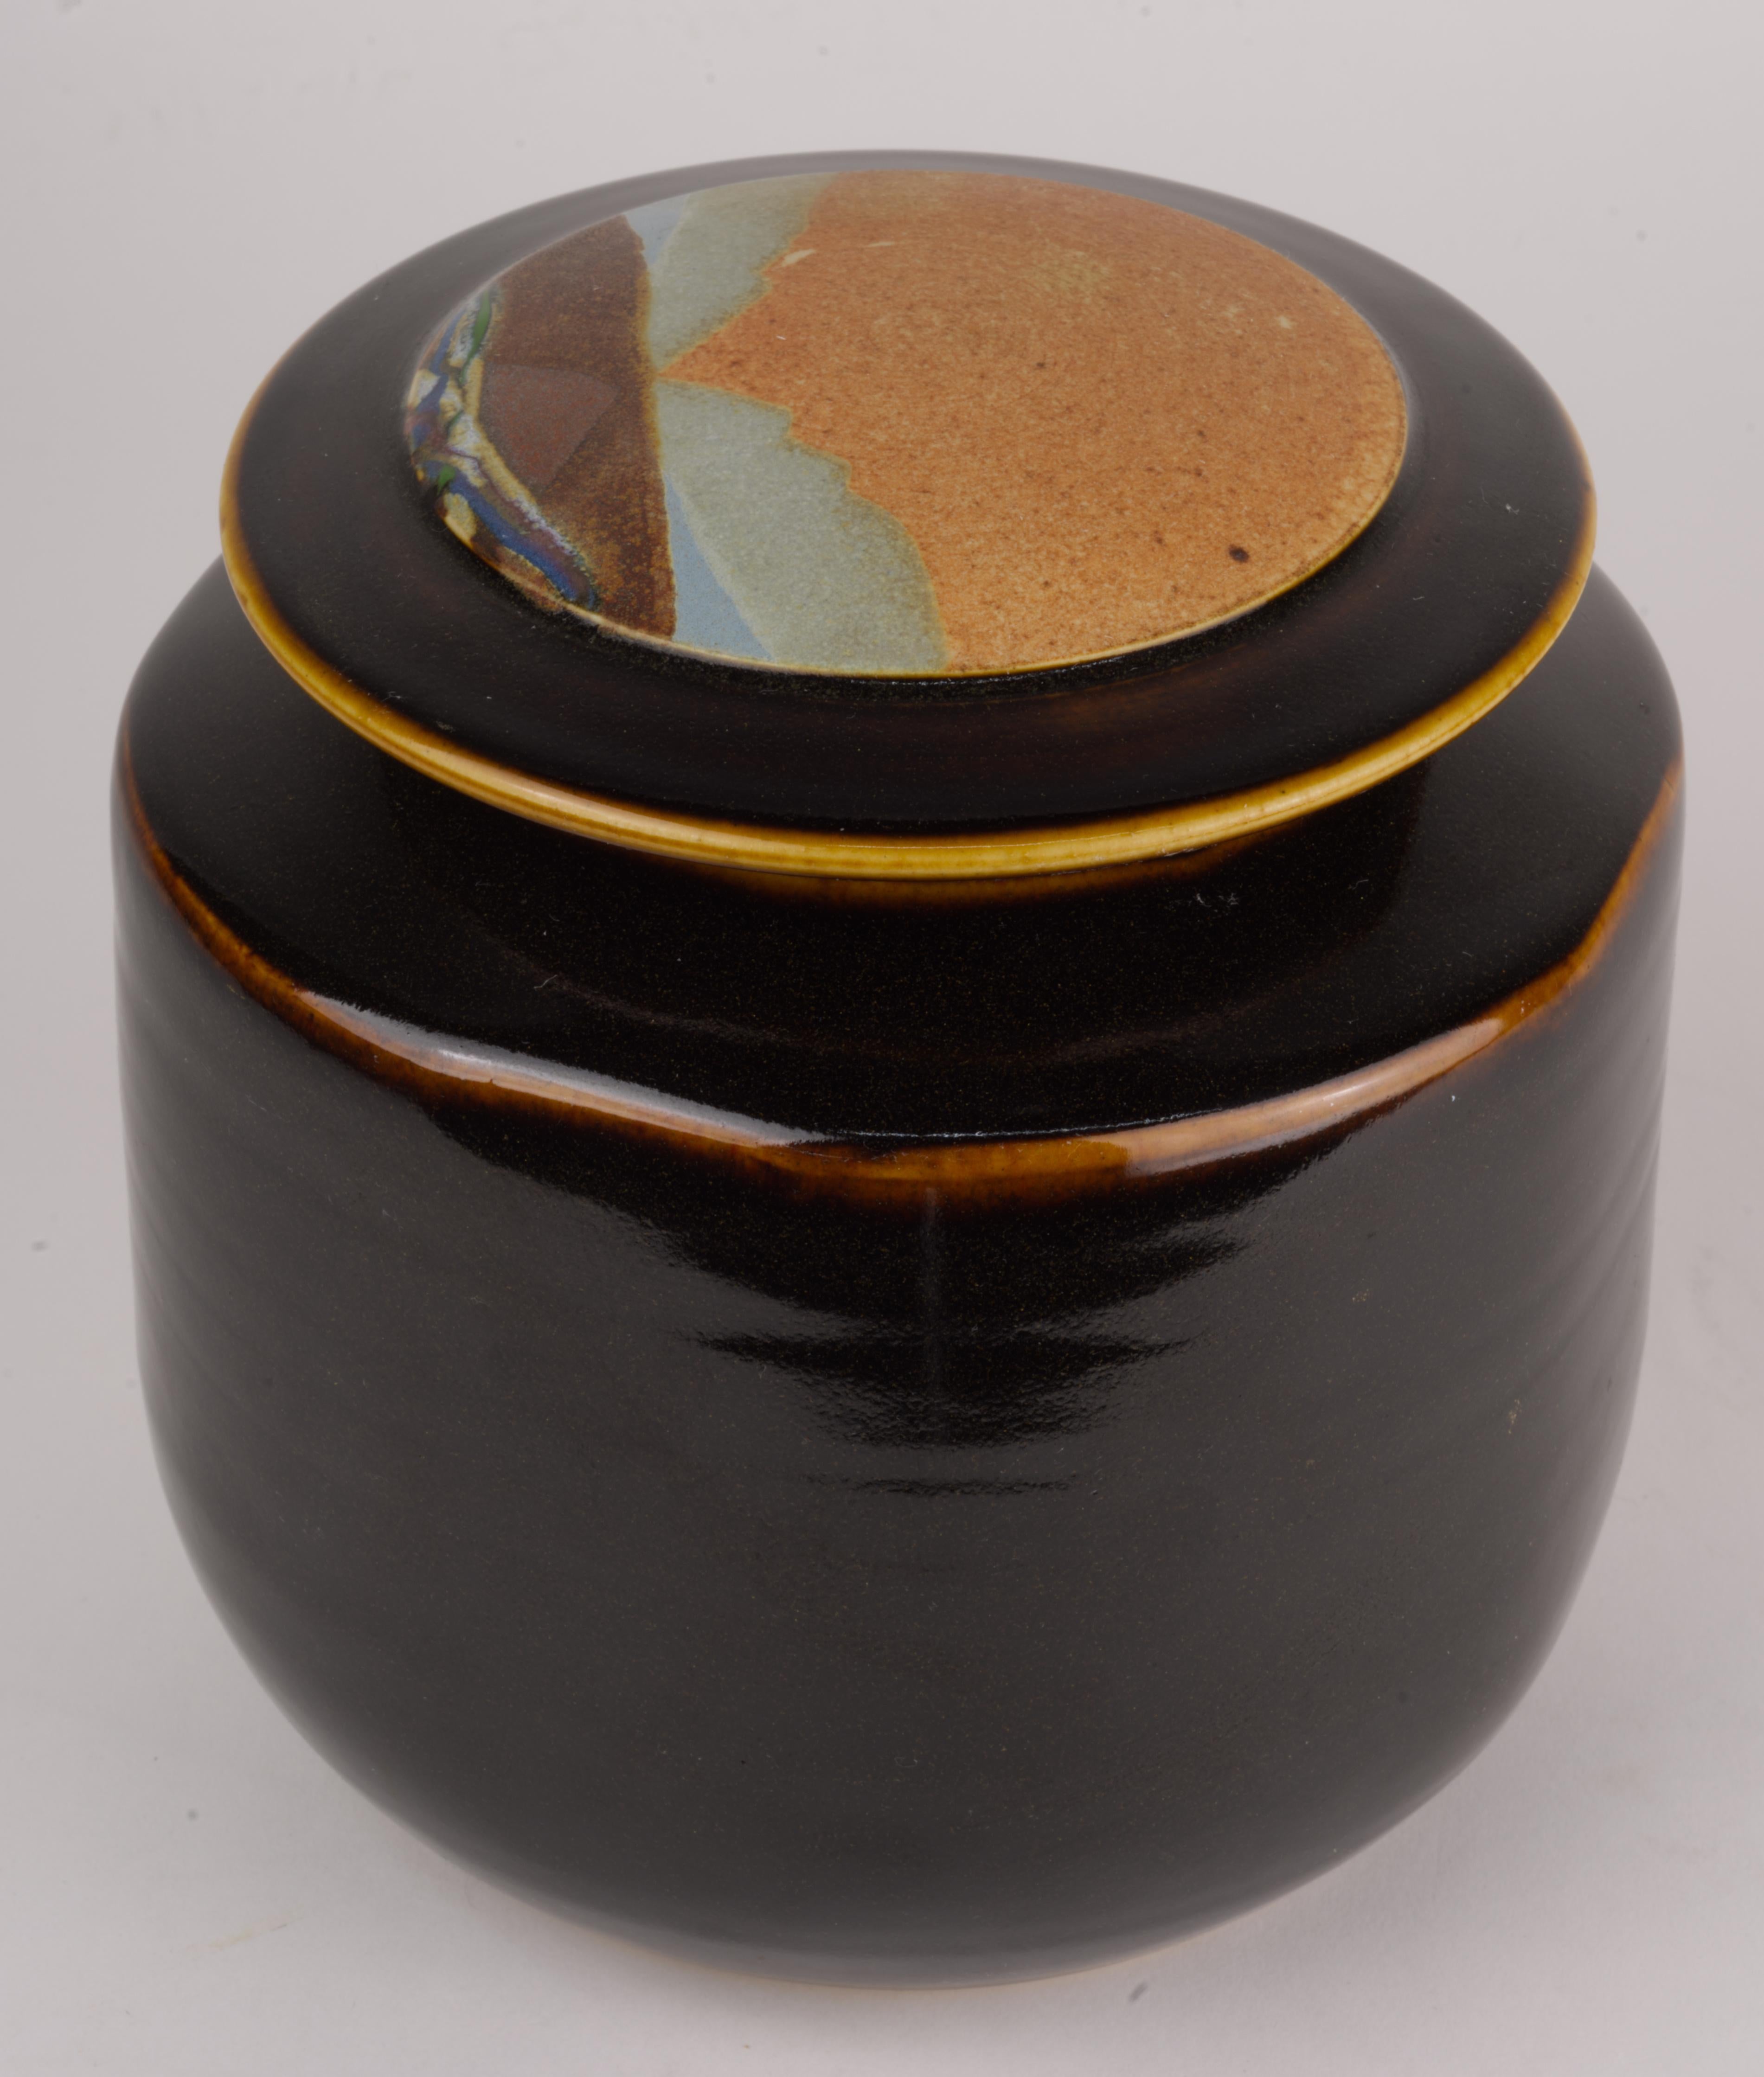  Covered vessel or jar was handmade in white clay by Rob Wiedmaier of River Hills Pottery as a part of a series done in 1980s. The lid of the vessel is decorated with abstract landscape design done in complex mix of multicolored, textured matte and